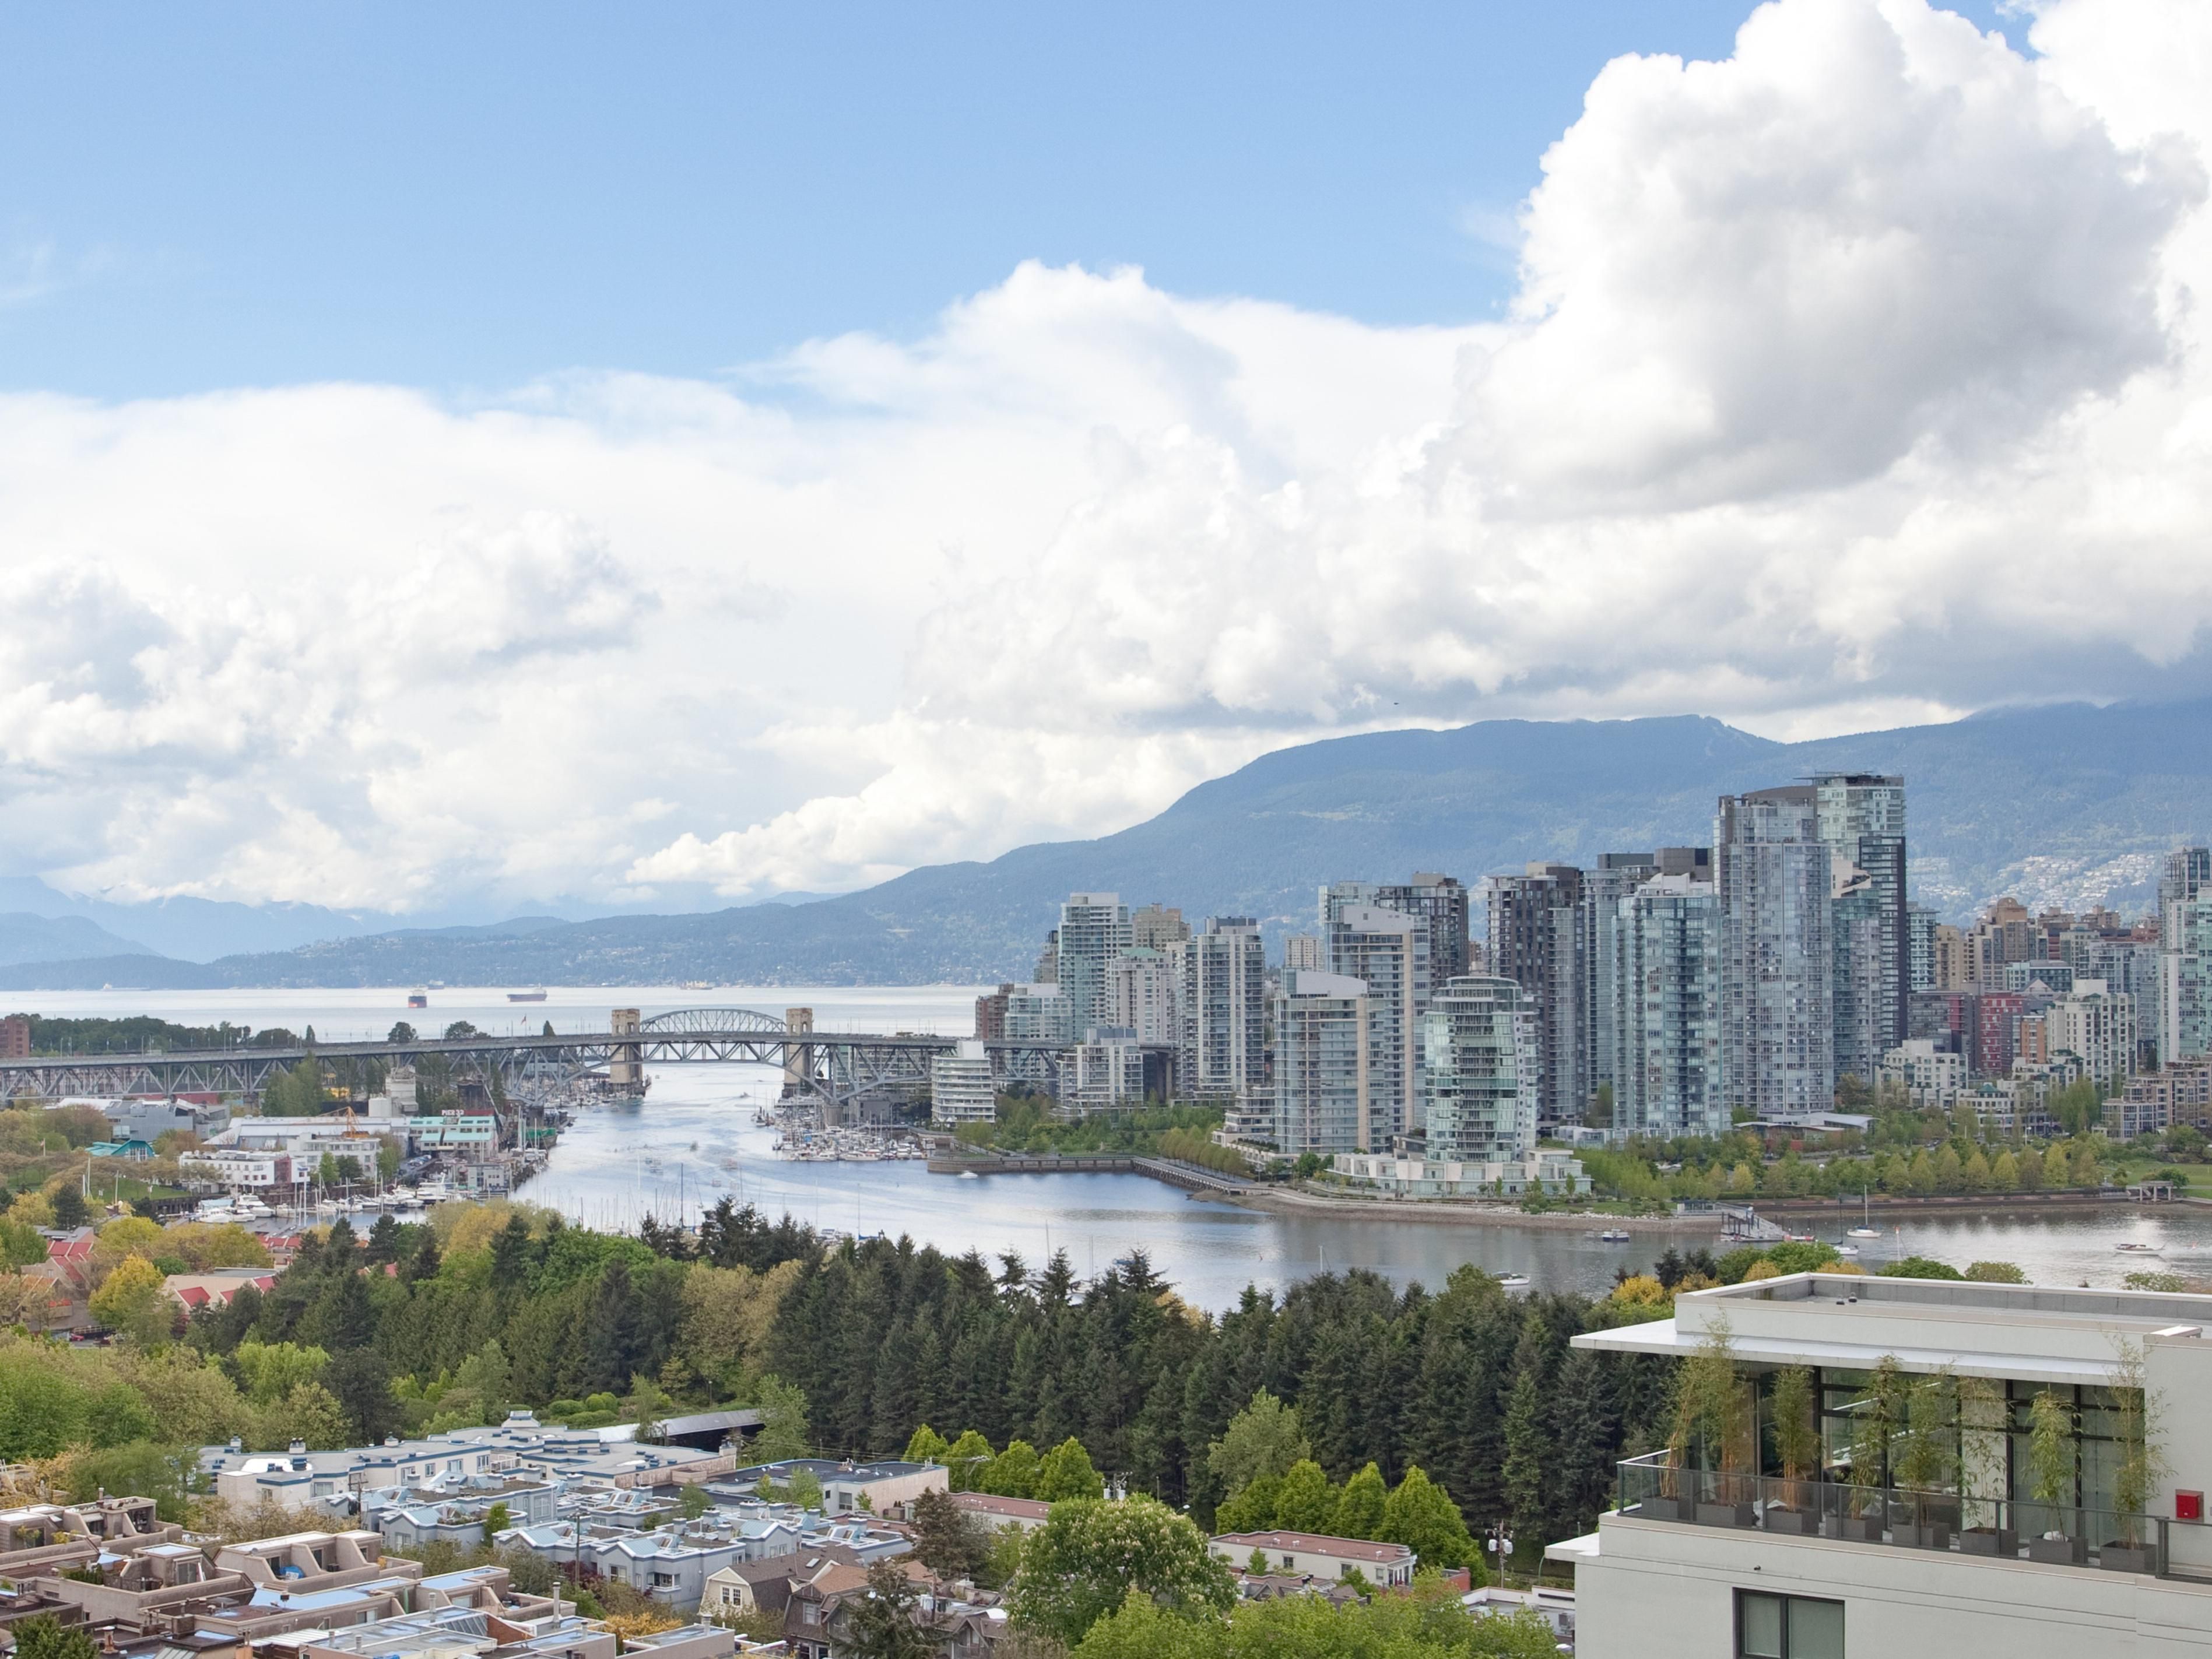 Known as one of the most beautiful cities anywhere, staying with us will show you exactly why. Views of the Burrard Inlet, Downtown Vancouver, and Coastal Mountains will have you wanting to stay a few more days. 